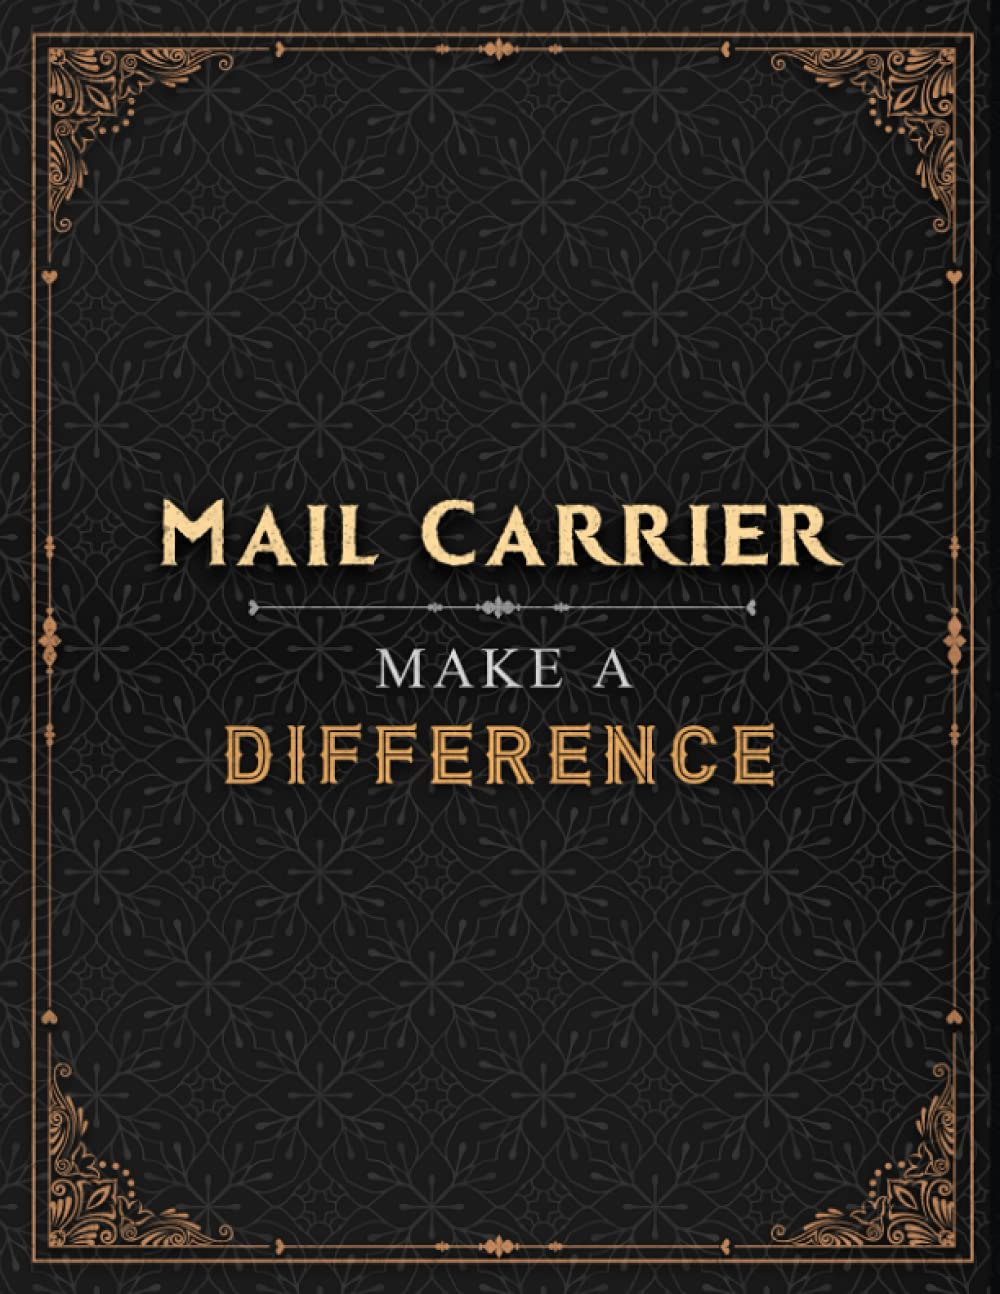 Mail Carrier Make A Difference Lined Notebook Journal: 8.5 x 11 inch, A4, Work List, Hourly, Menu, Financial, 21.59 x 27.94 cm, A Blank, Over 100 Pages, Daily